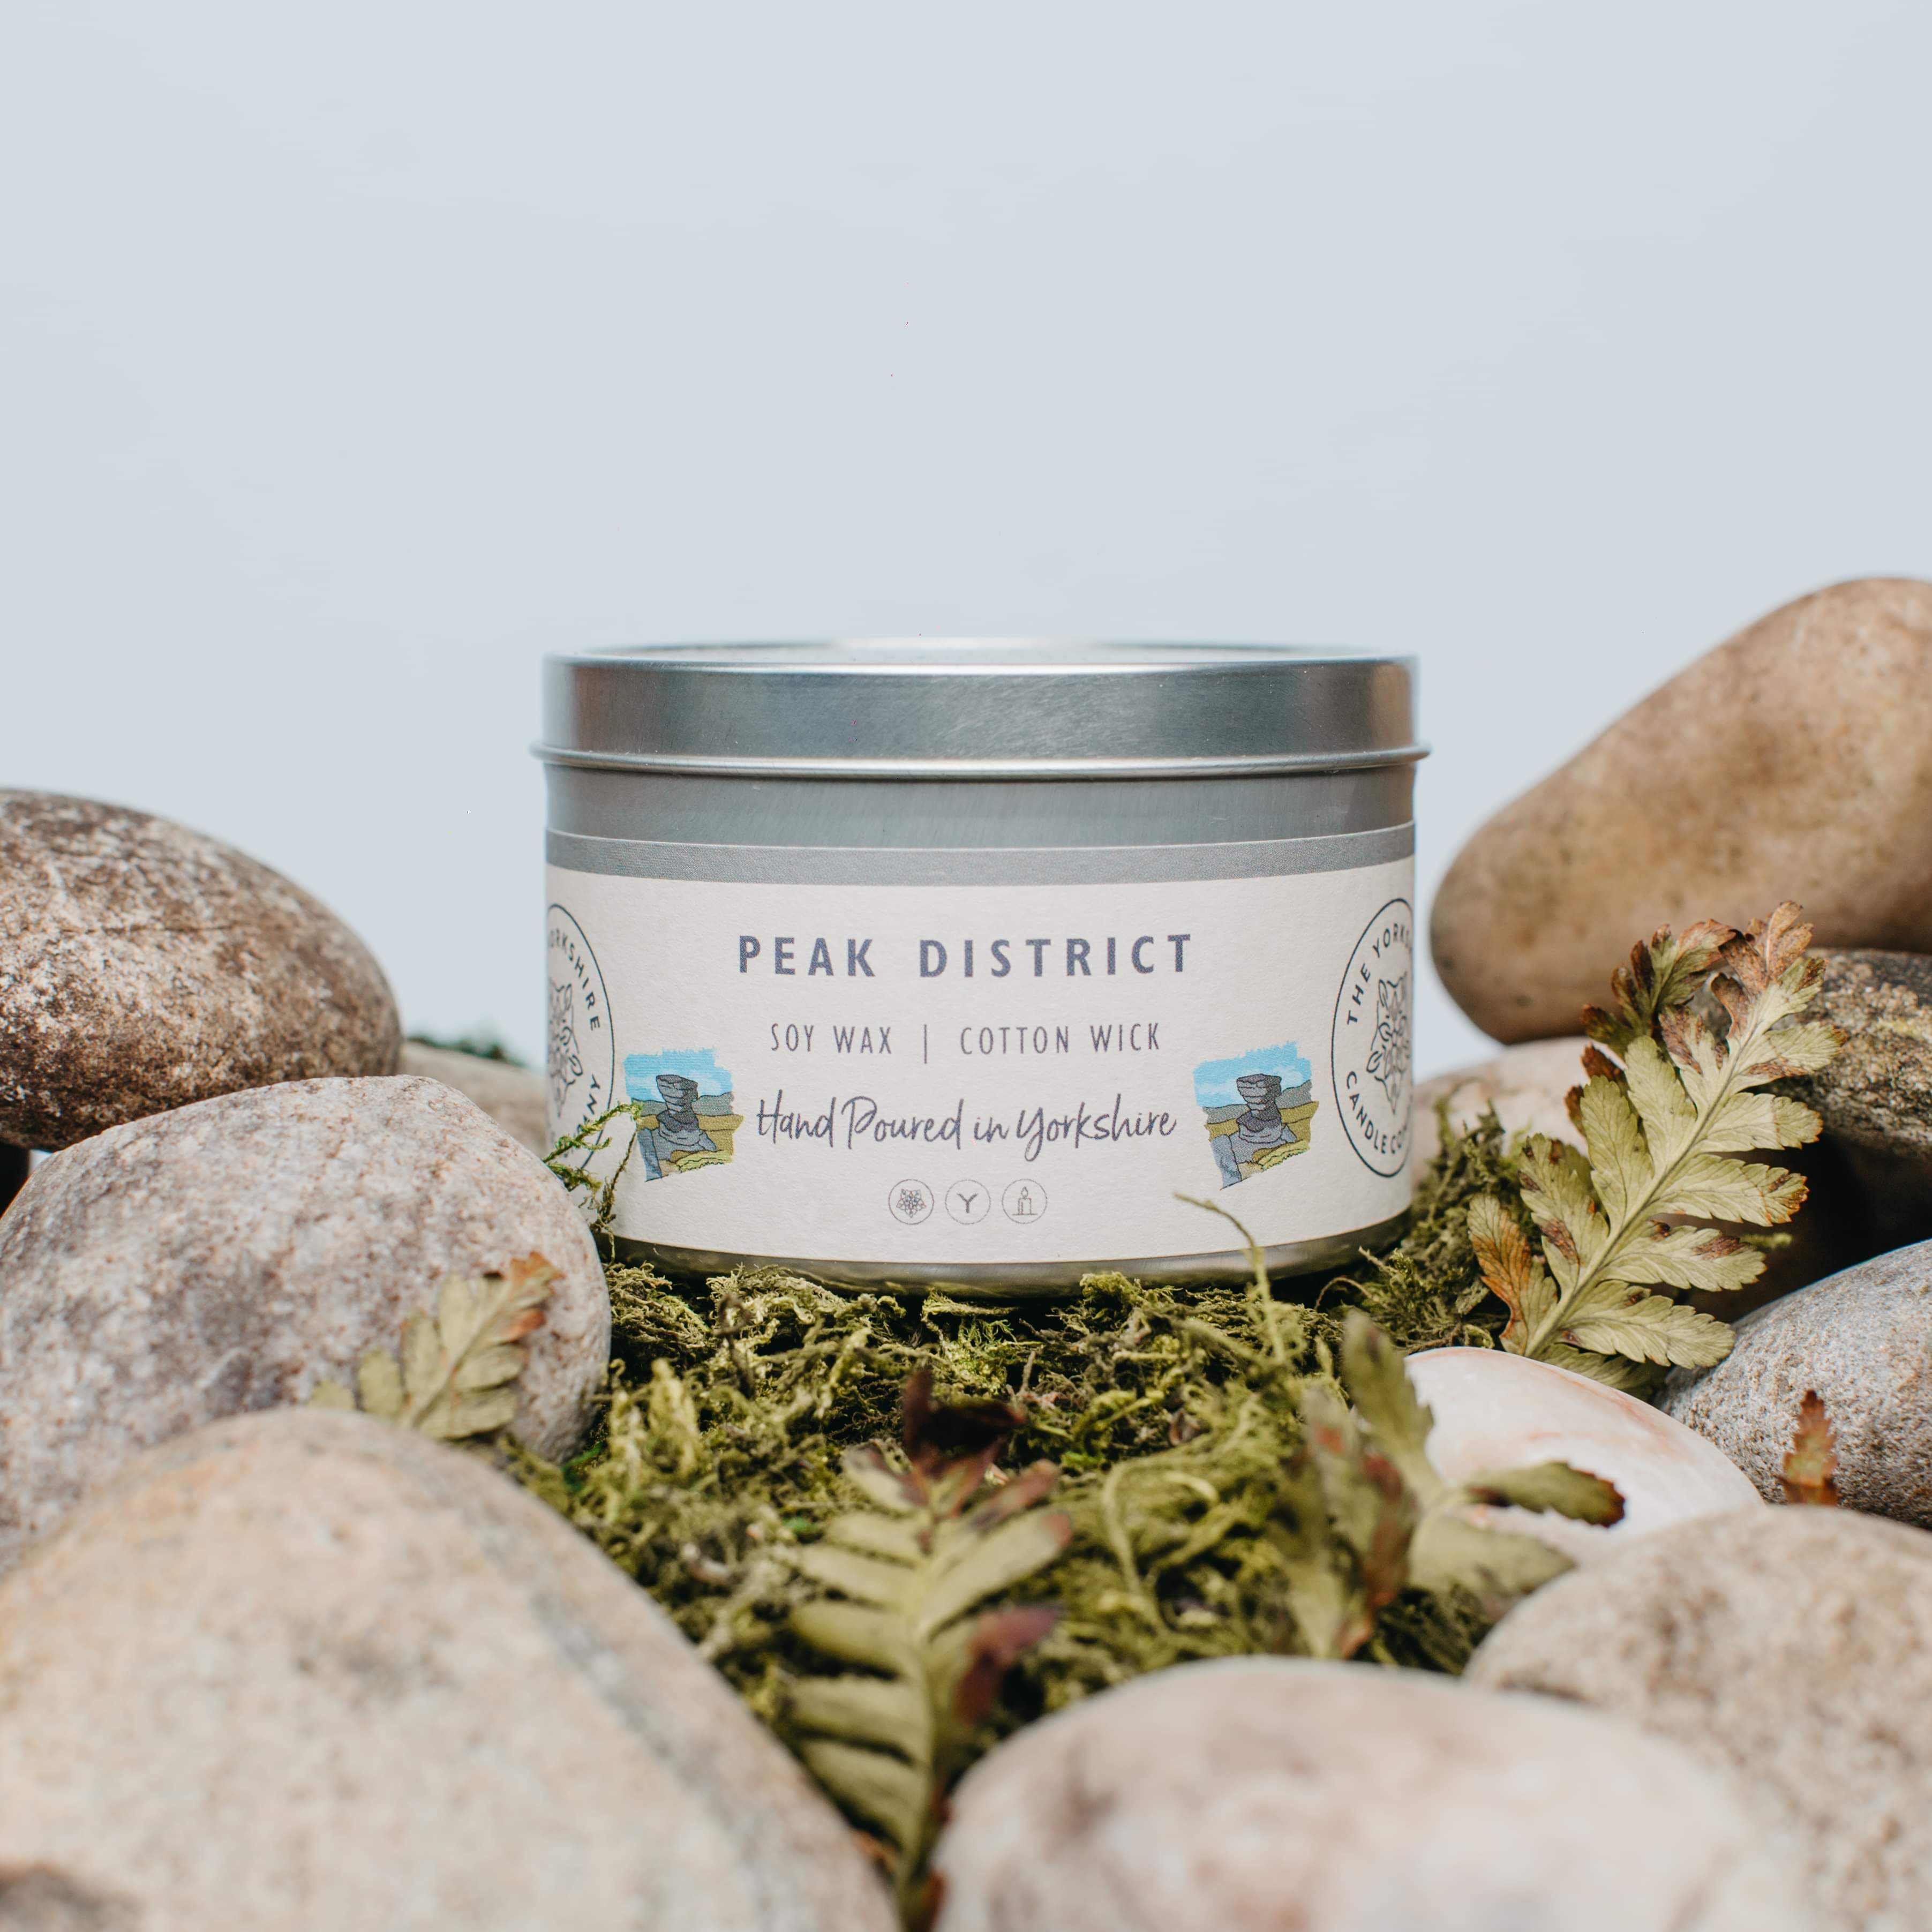 Peak District Soy Wax Scented Candle